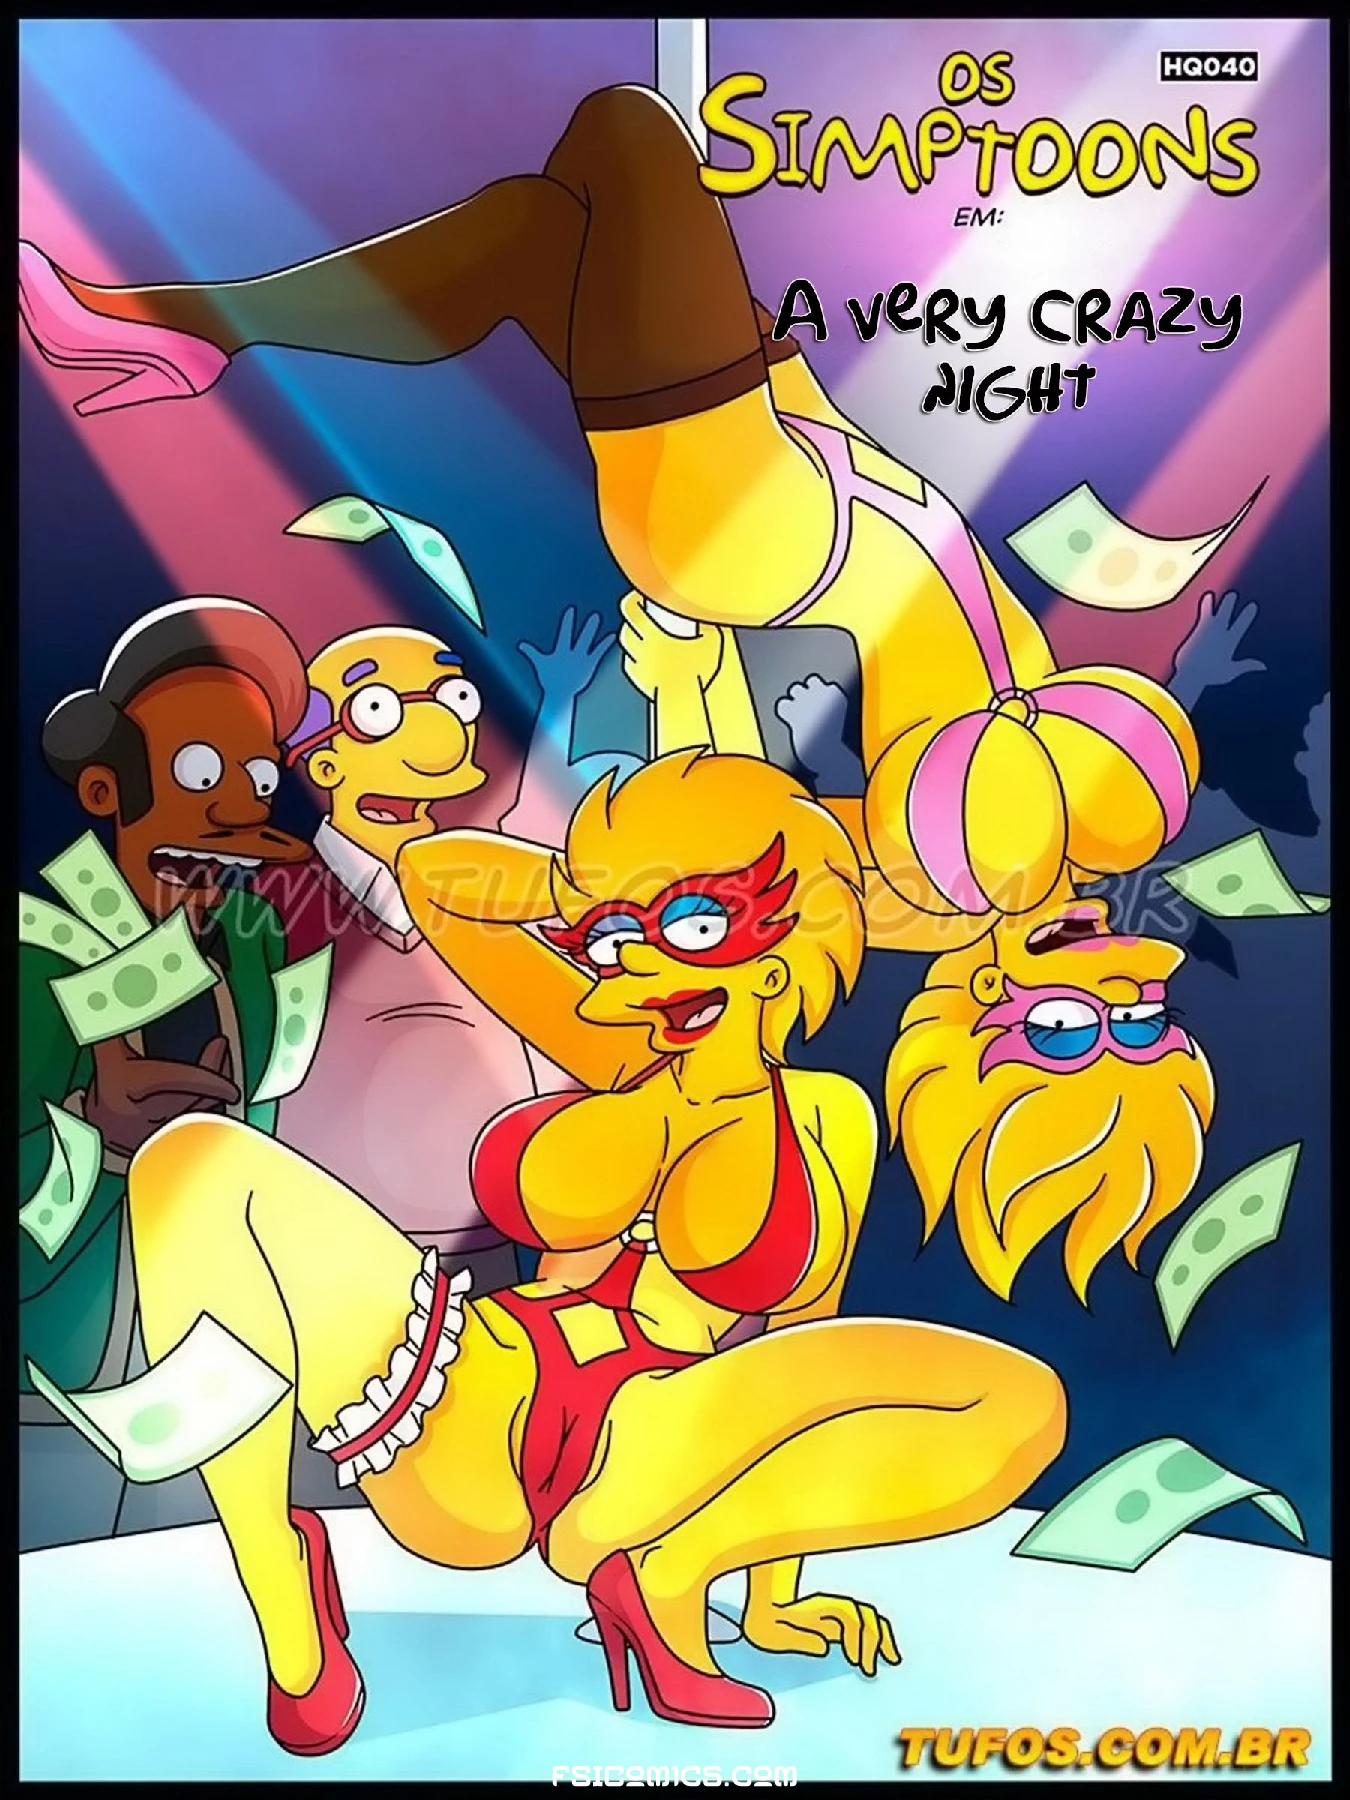 The Simpsons Chapter 40 – A Very Crazy Night – WC TF - 43 - FSIComics